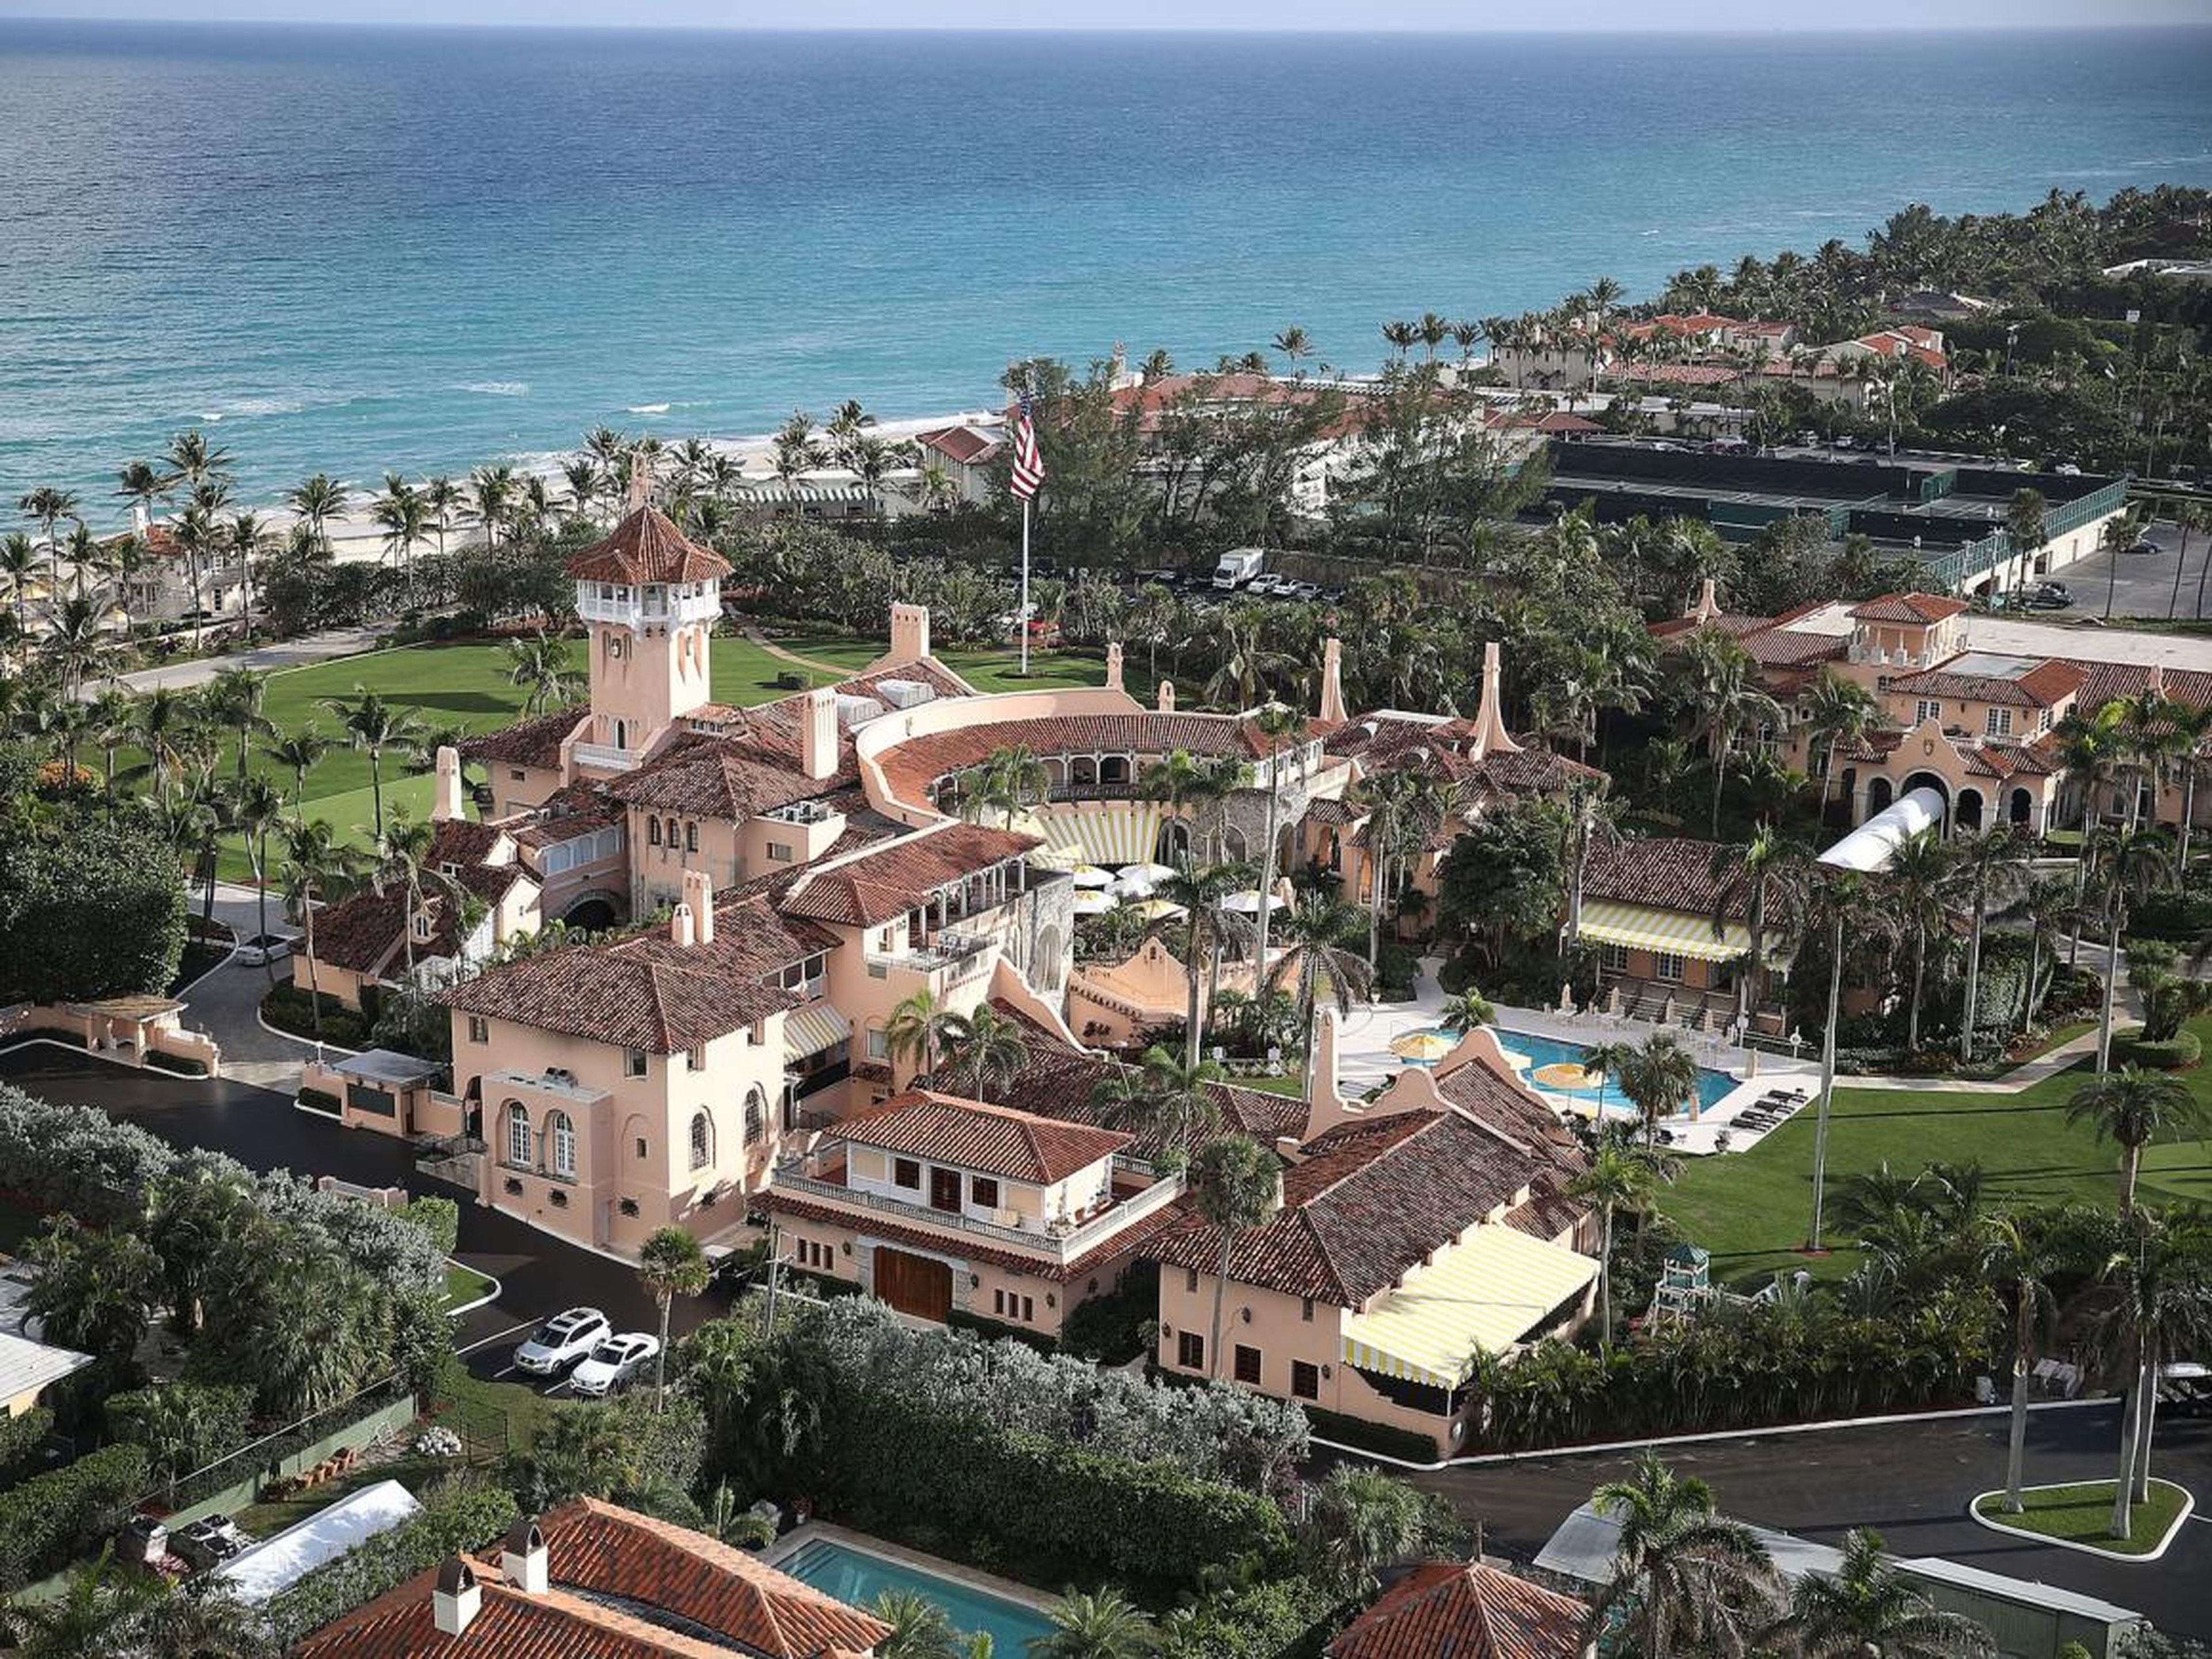 A real estate tycoon, Trump has more than one residence. The Trumps have often been spotted Mar-A-Lago, a 17-acre estate in Palm Beach, Florida, that Trump purchased for $10 million. It has 58 bedrooms, 33 bathrooms, 12 fireplaces